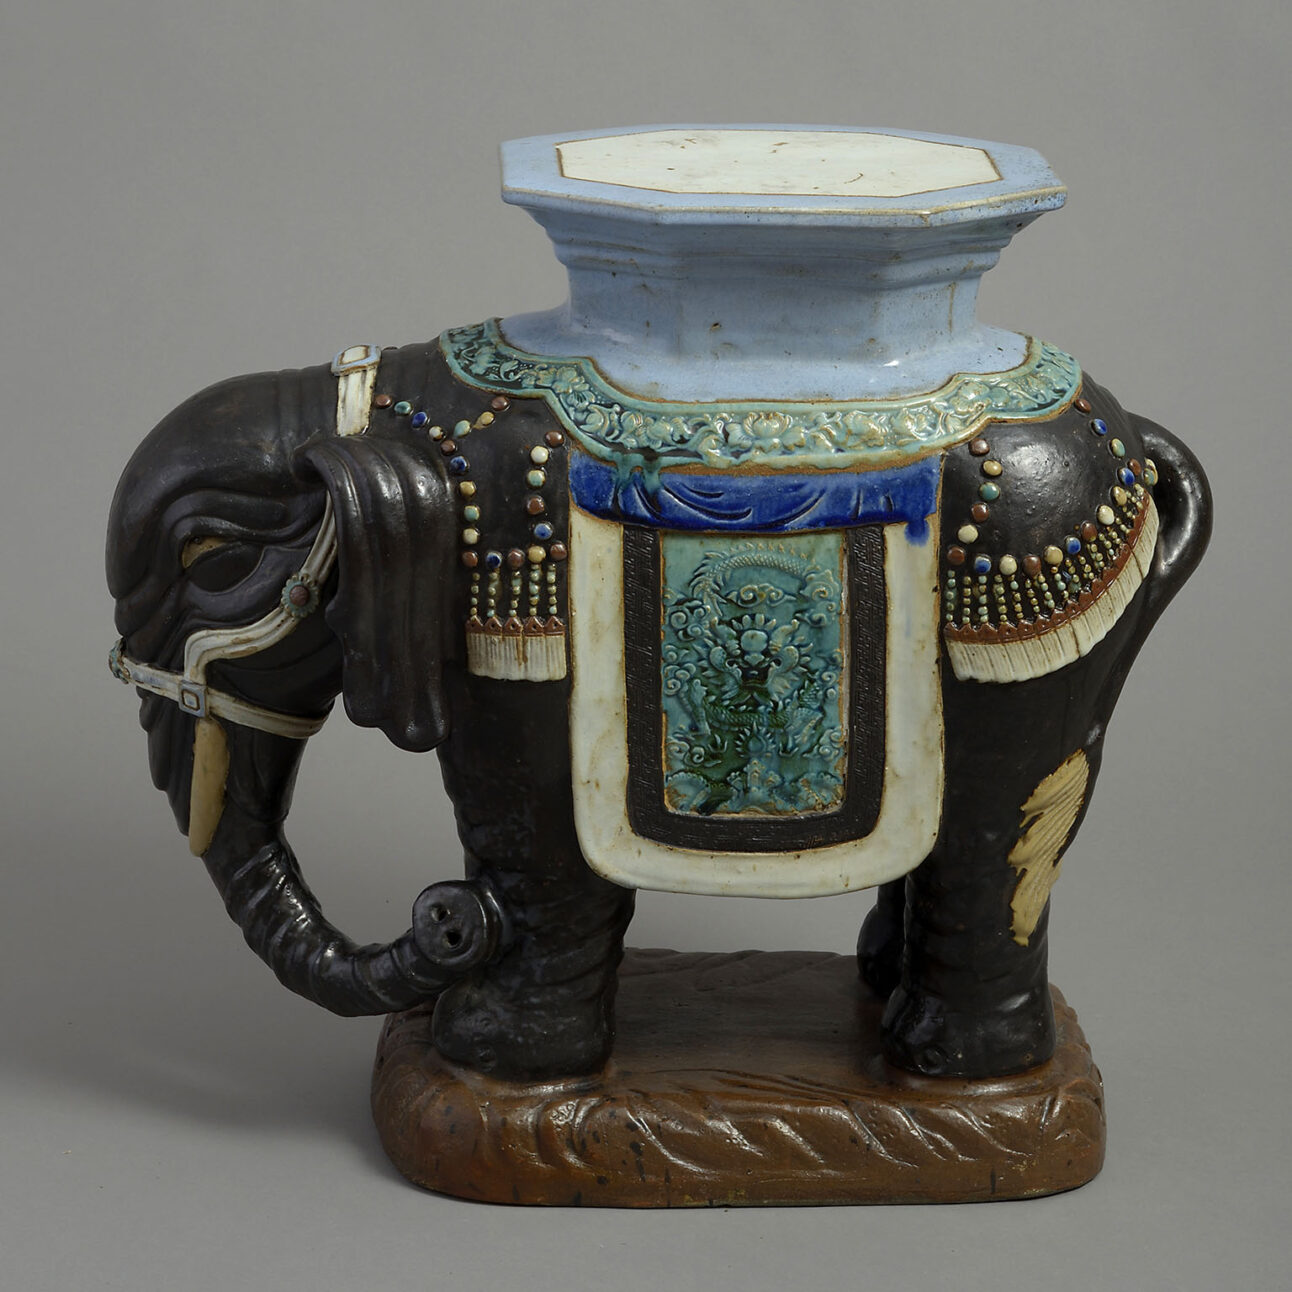 Pottery seat/stand/table in form of an Elephant